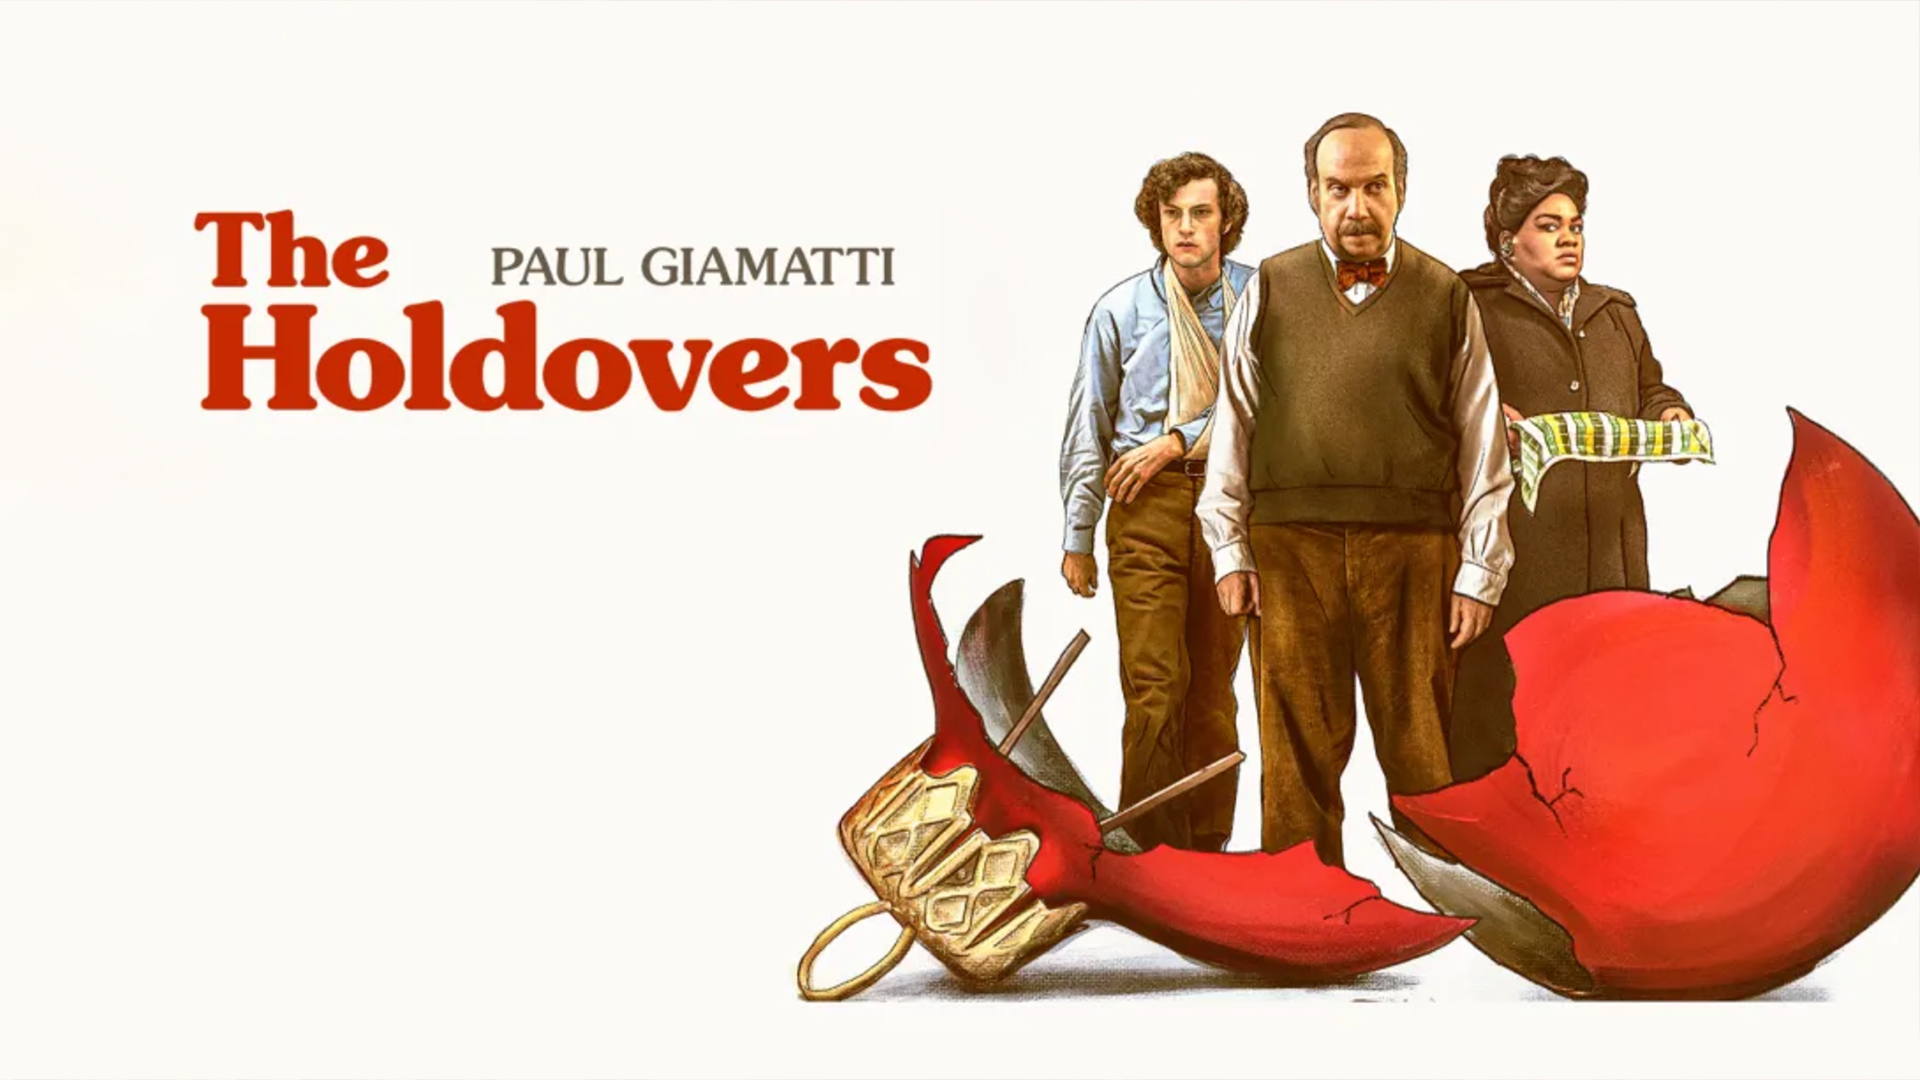 Silver Screening: The Holdovers